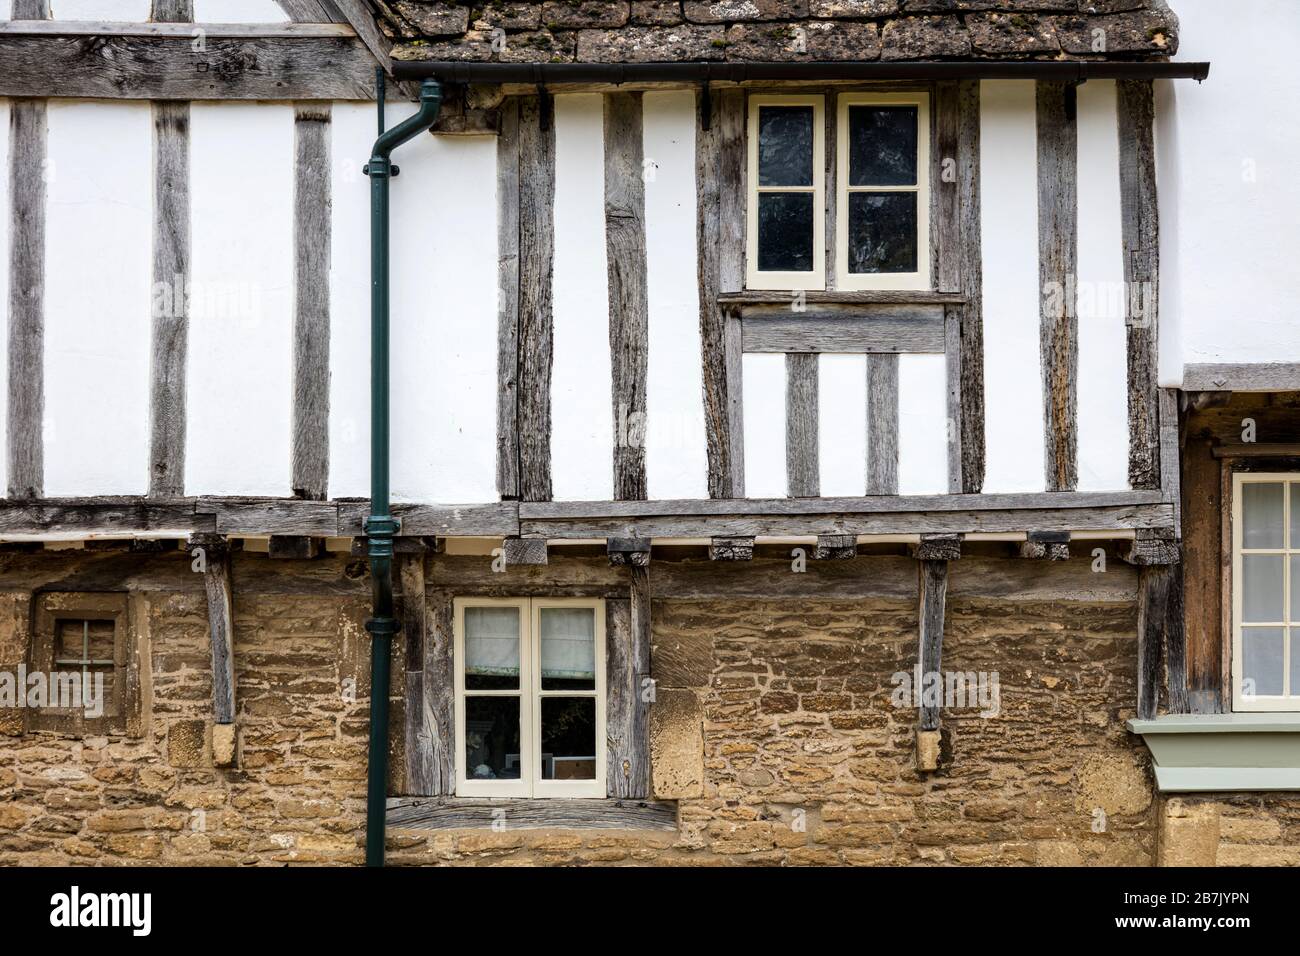 Medieval half-timbered building in Cotswold village of Lacock, Wiltshire, England, UK Stock Photo